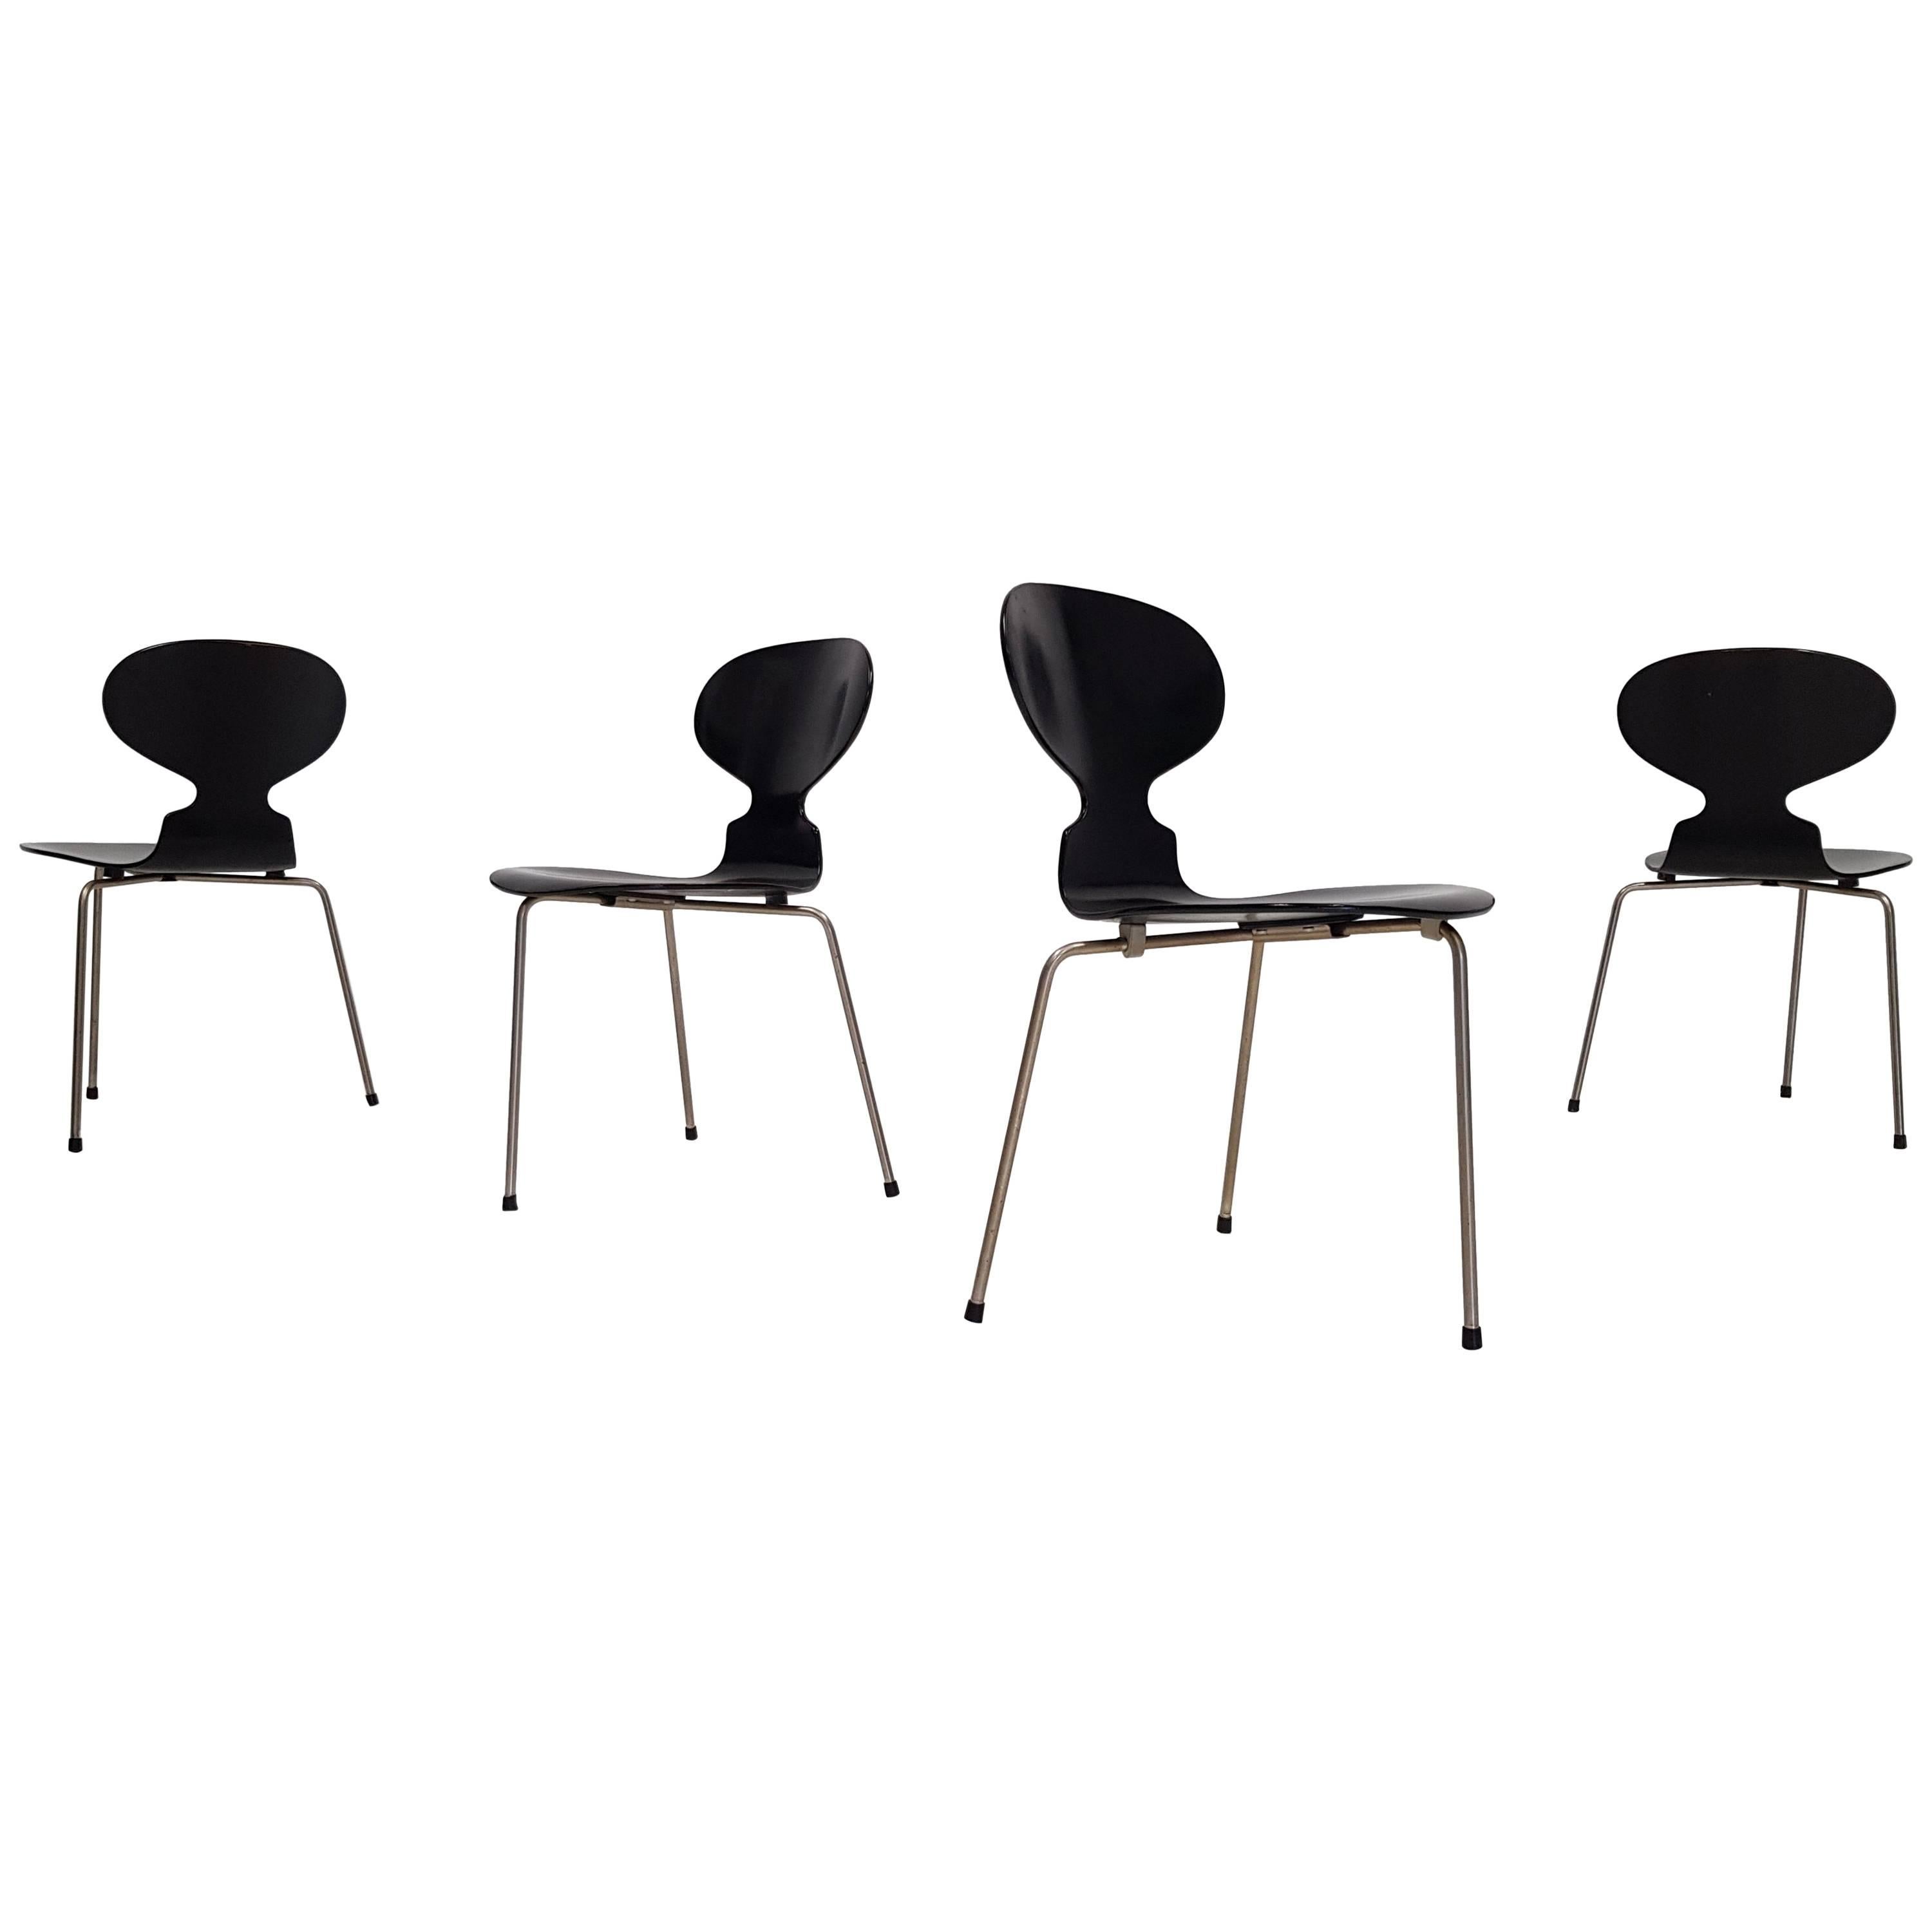 Early Model 3100 'Ant' Chairs by Arne Jacobsen for Fritz Hansen Designed in 1952